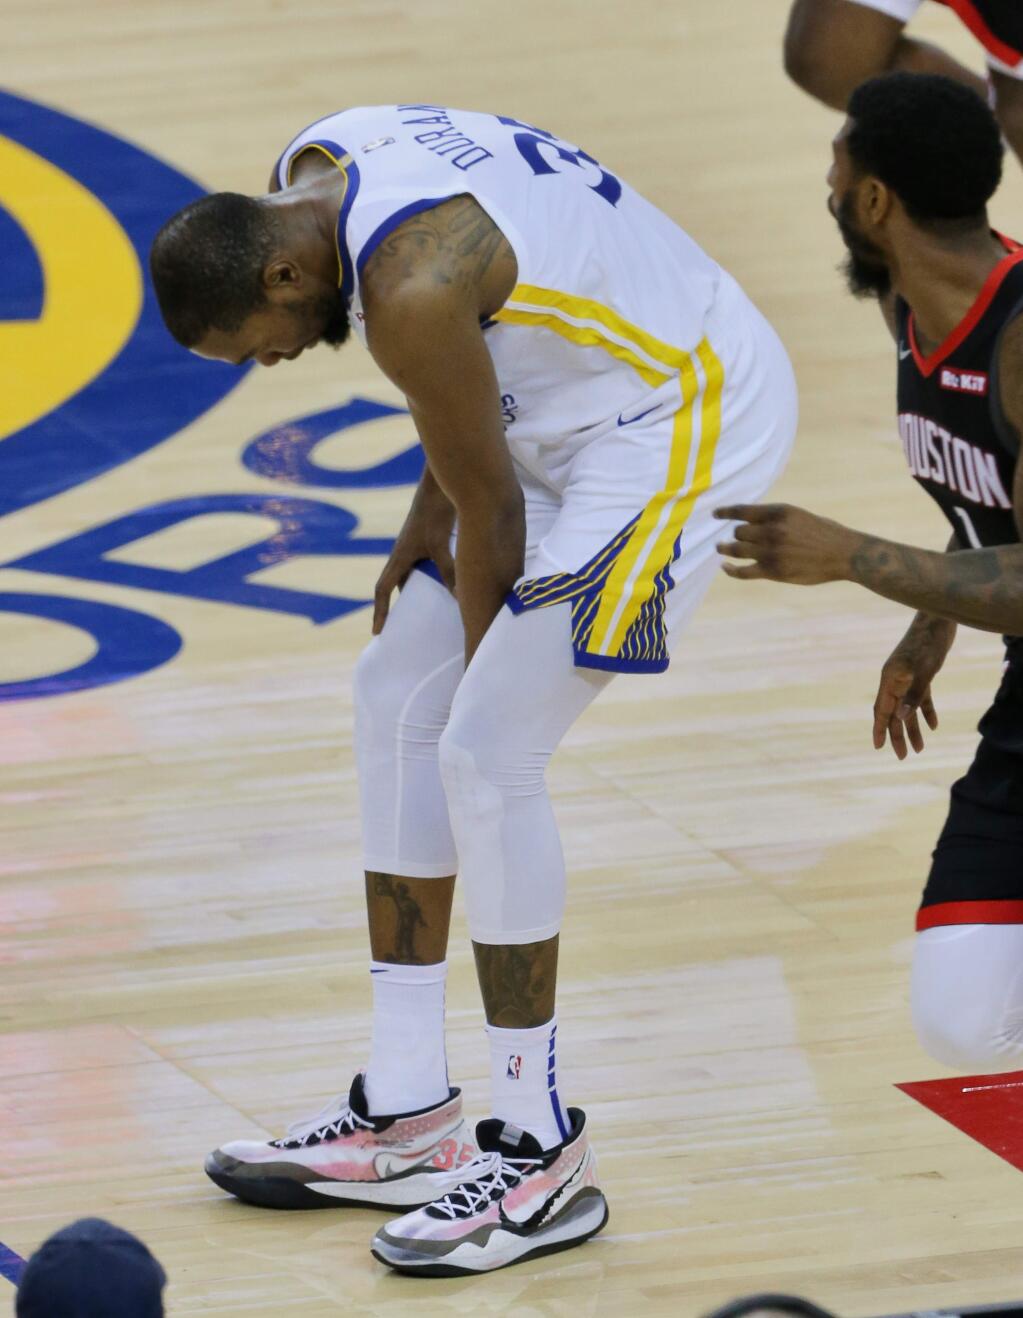 Golden State Warriors forward Kevin Durant grabs his leg during the game against the Houston Rockets in Oakland on Wednesday, May 8, 2019. (Christopher Chung / The Press Democrat)